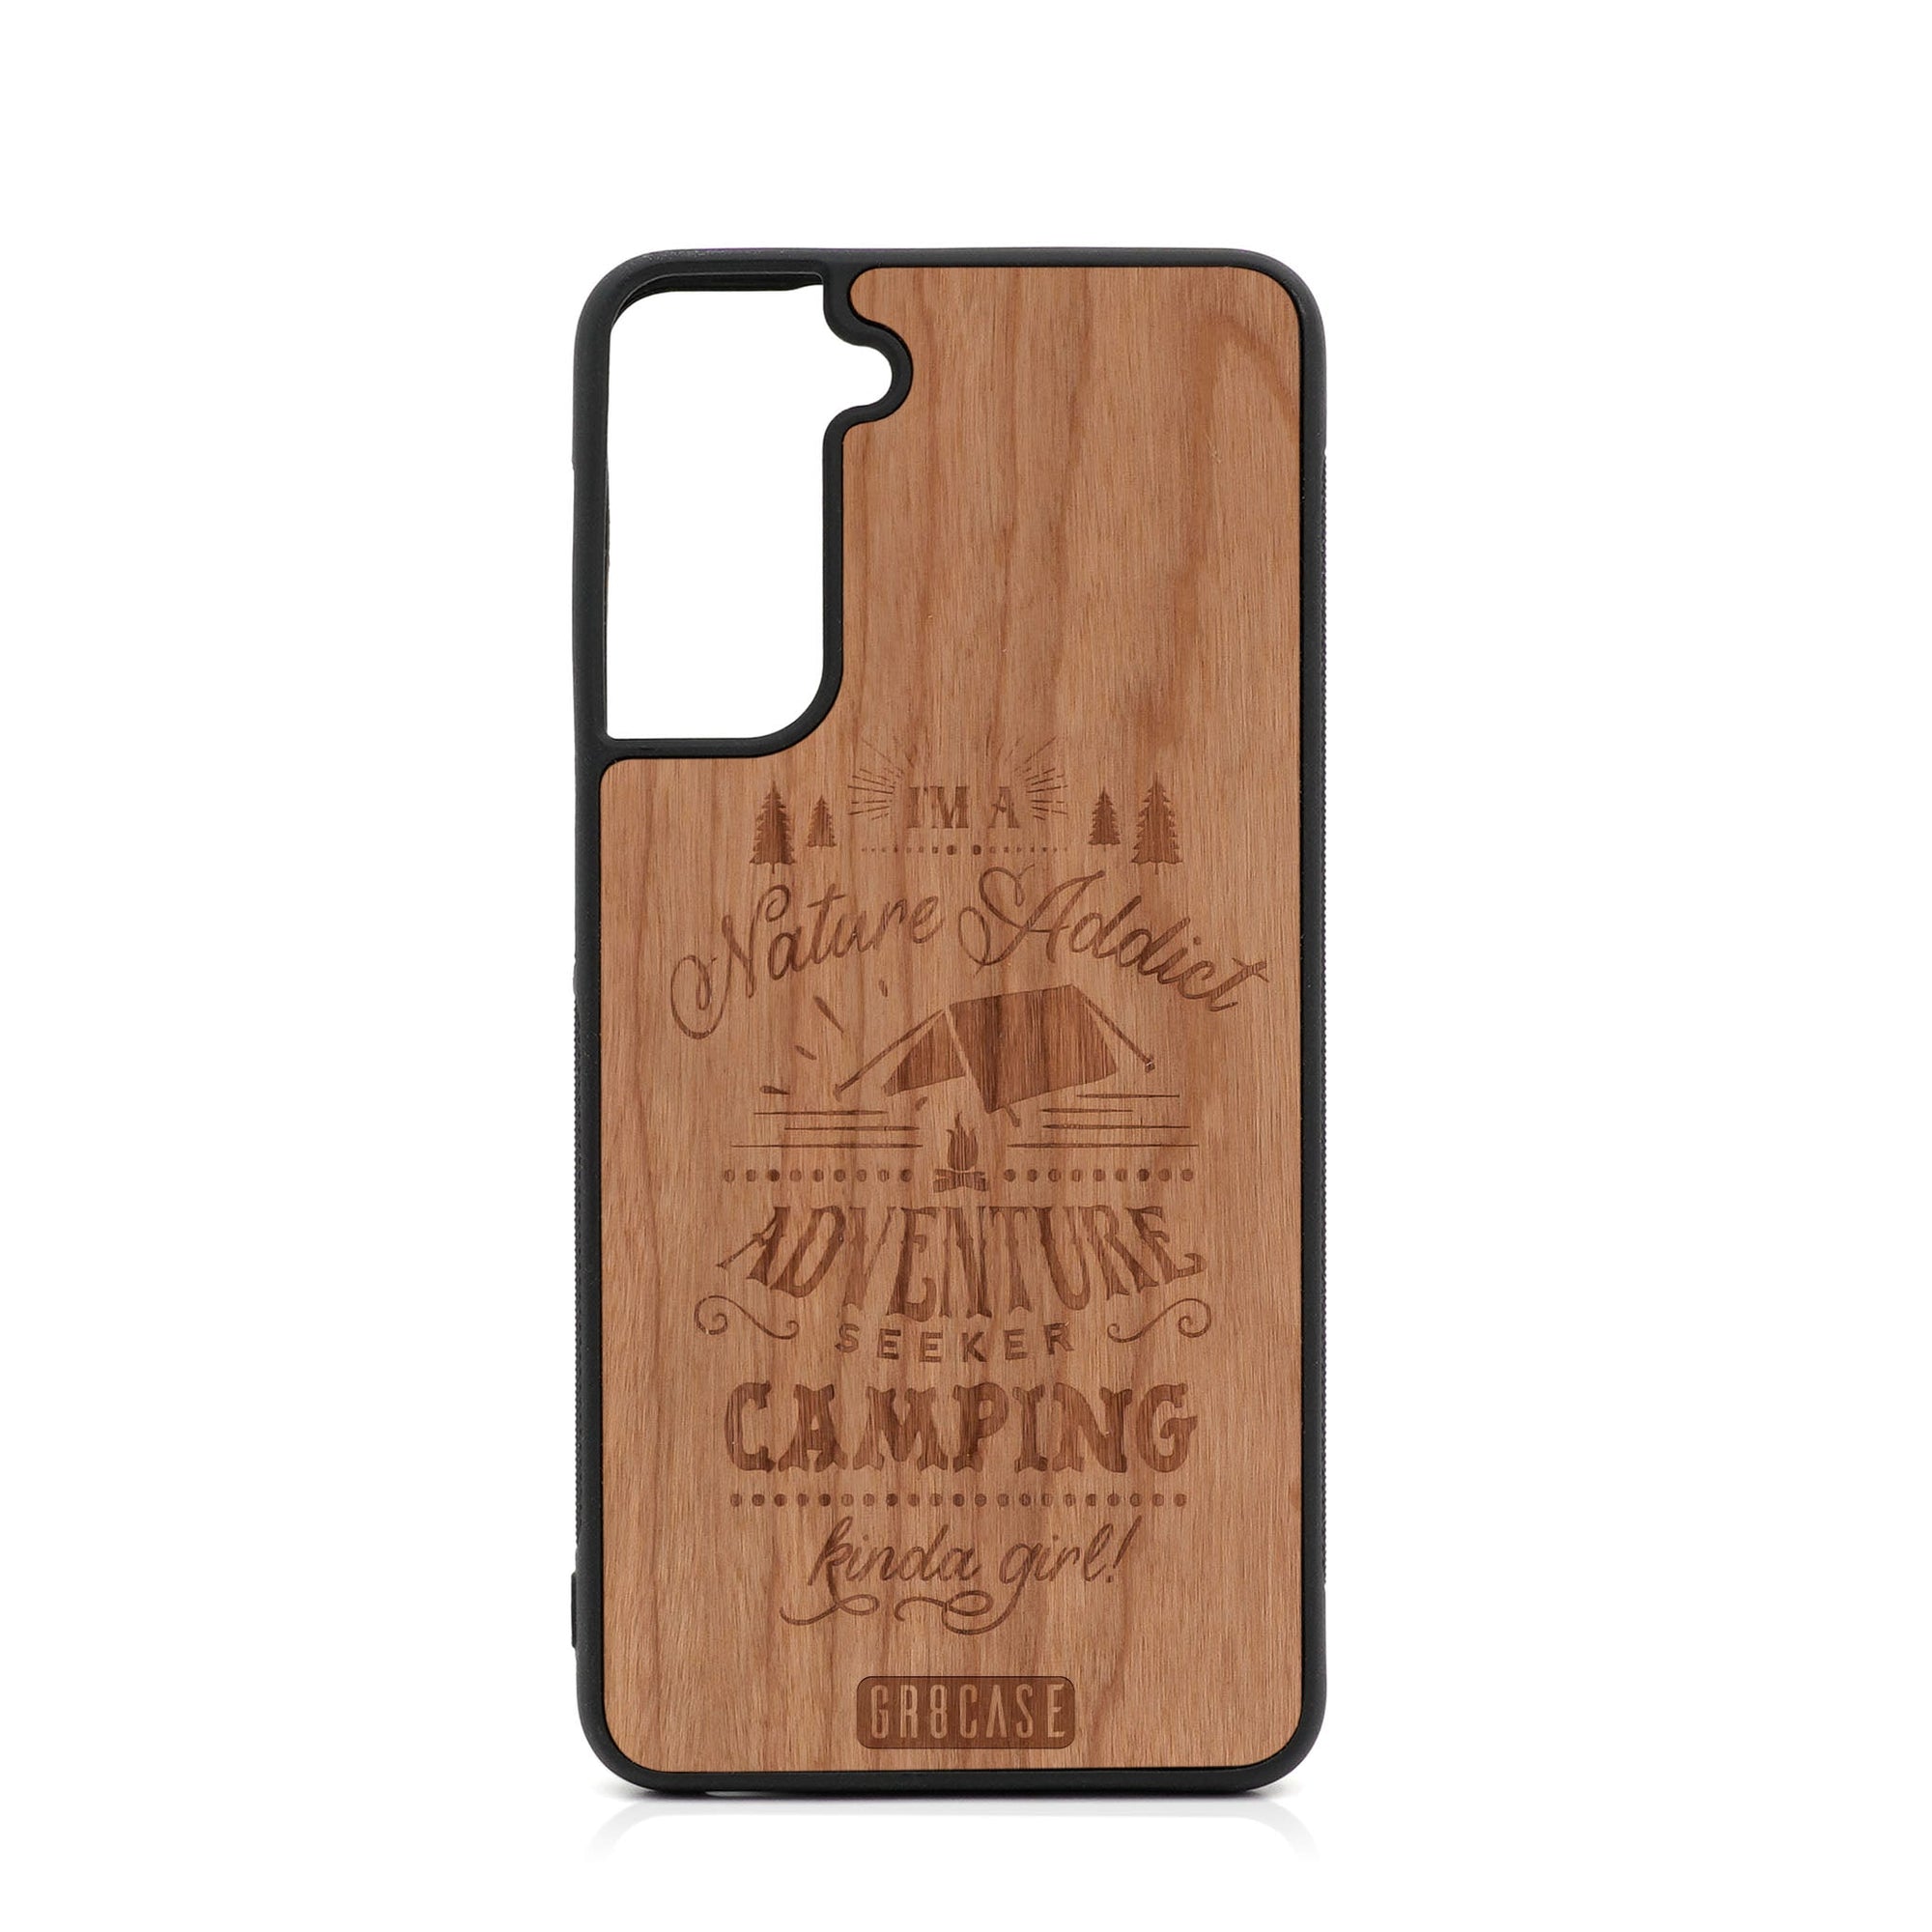 I'm A Nature Addict Adventure Seeker Camping Kinda Girl Design Wood Case For Samsung Galaxy S24 5G